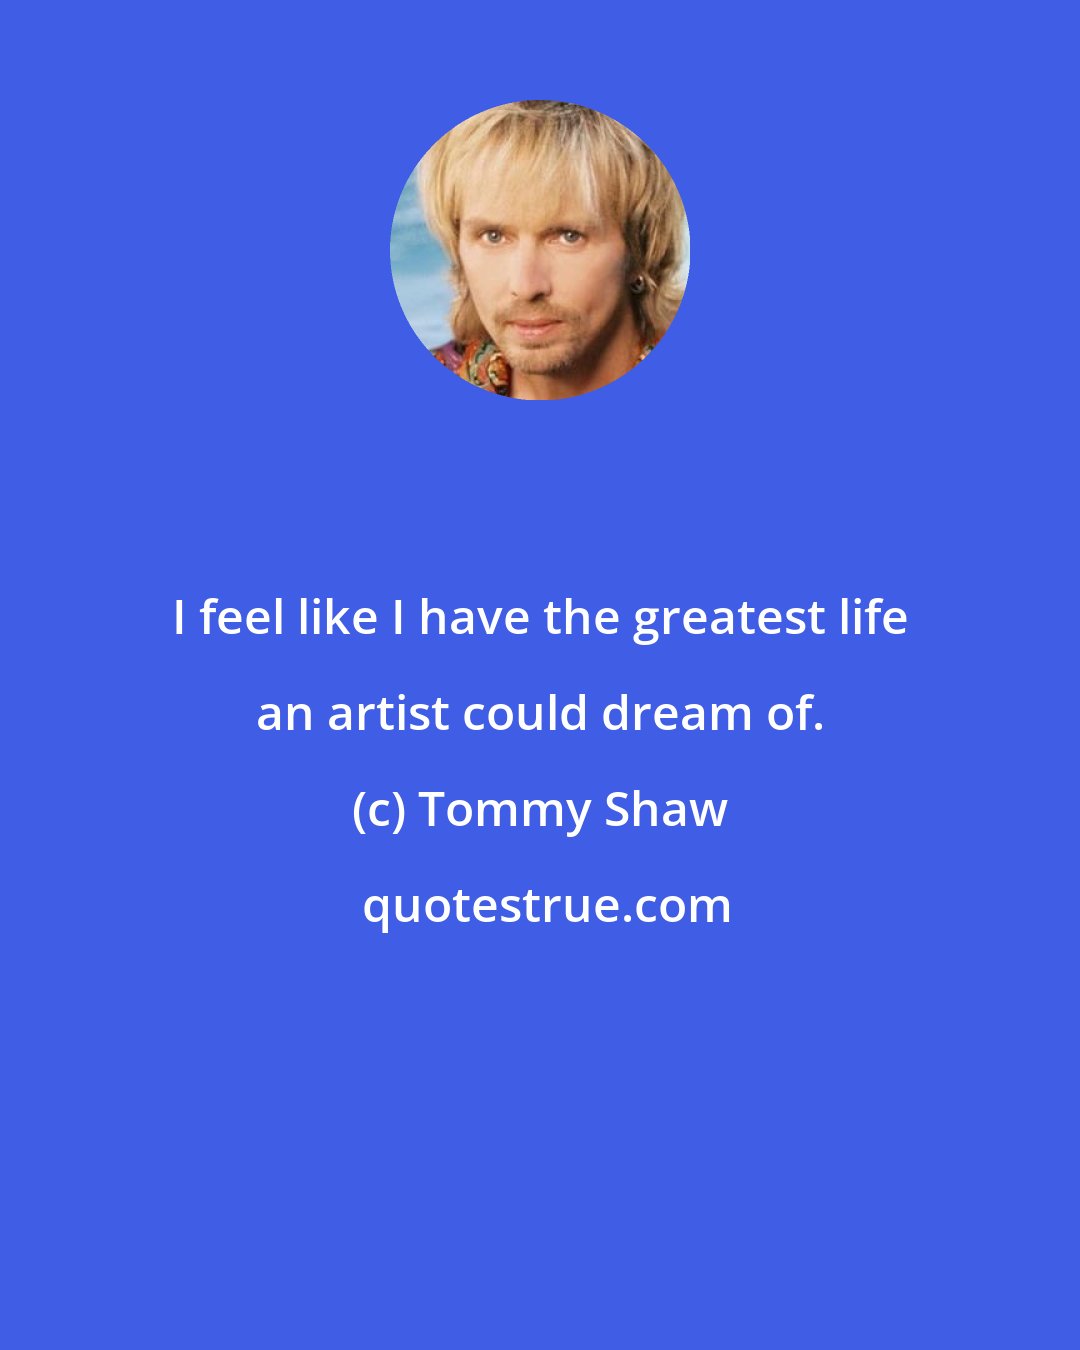 Tommy Shaw: I feel like I have the greatest life an artist could dream of.